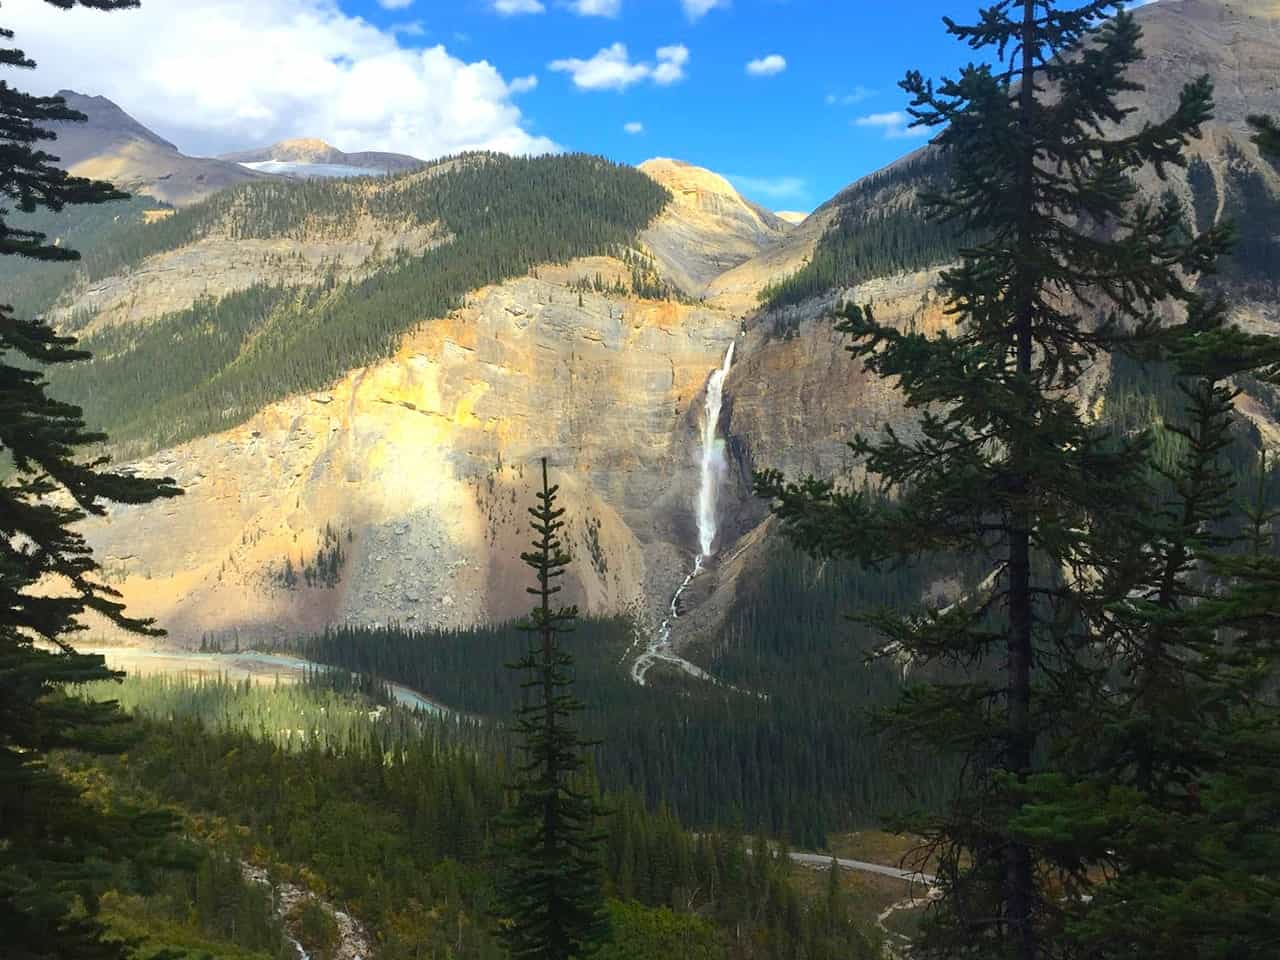 Top Attractions in the Kootenay Rockies, Takakkaw Falls from the Iceline Trail